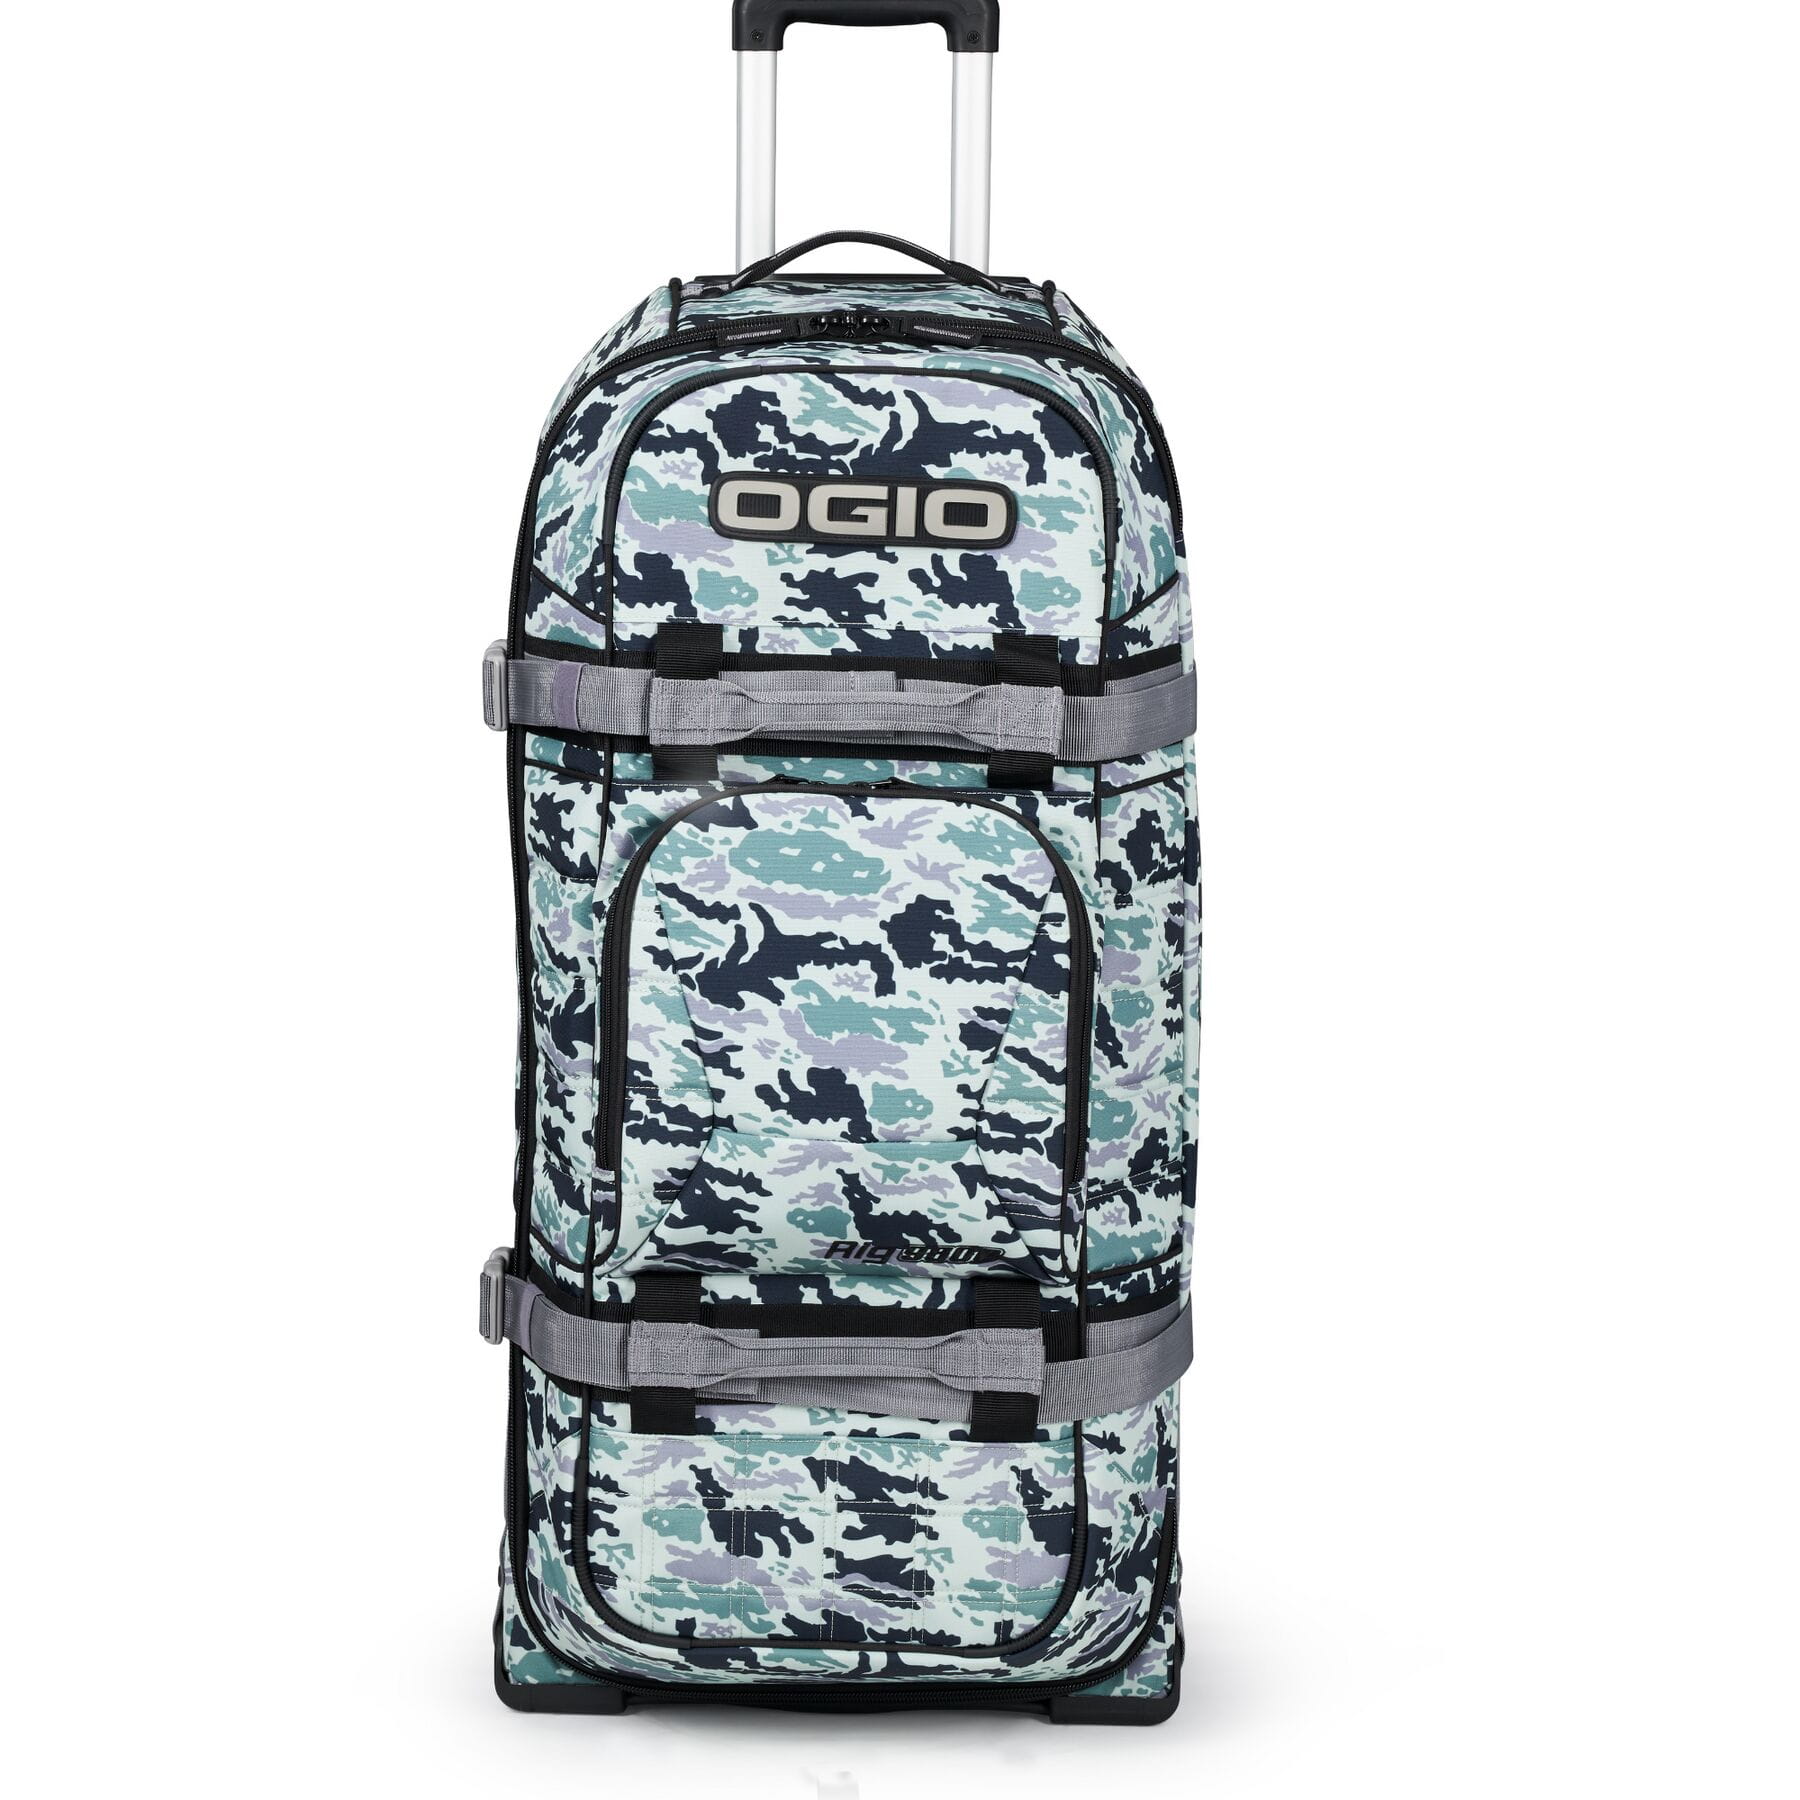 Rig 9800 wheeled gear bag featuring Double Camo design, showcasing its compartments and durability.